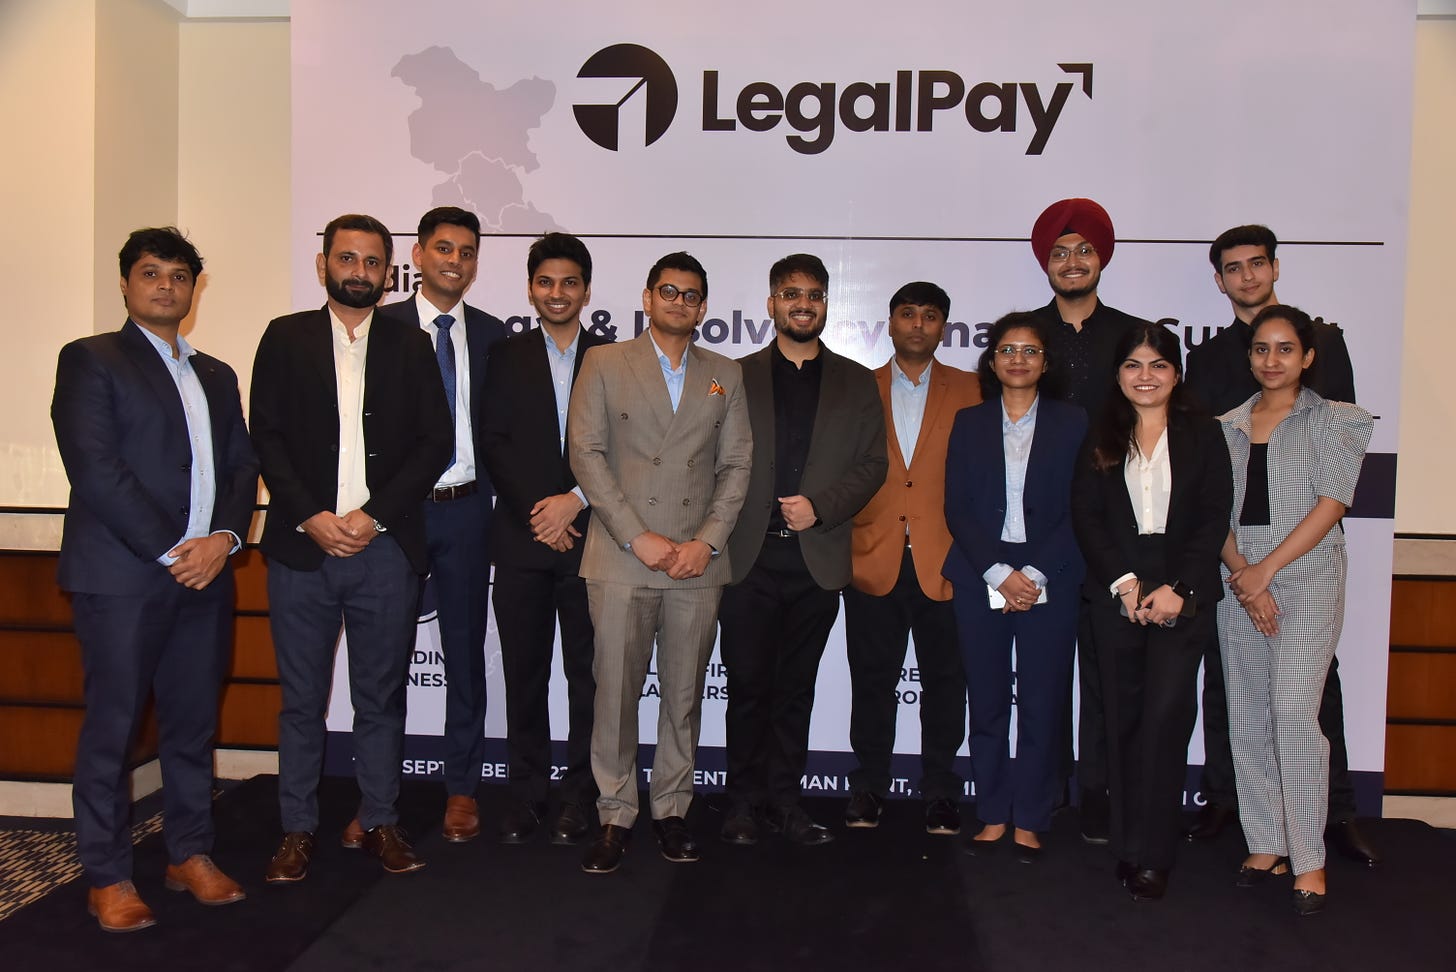 A group of people, consisting of the team of LegalPay, standing under a banner displaying their organisation's name